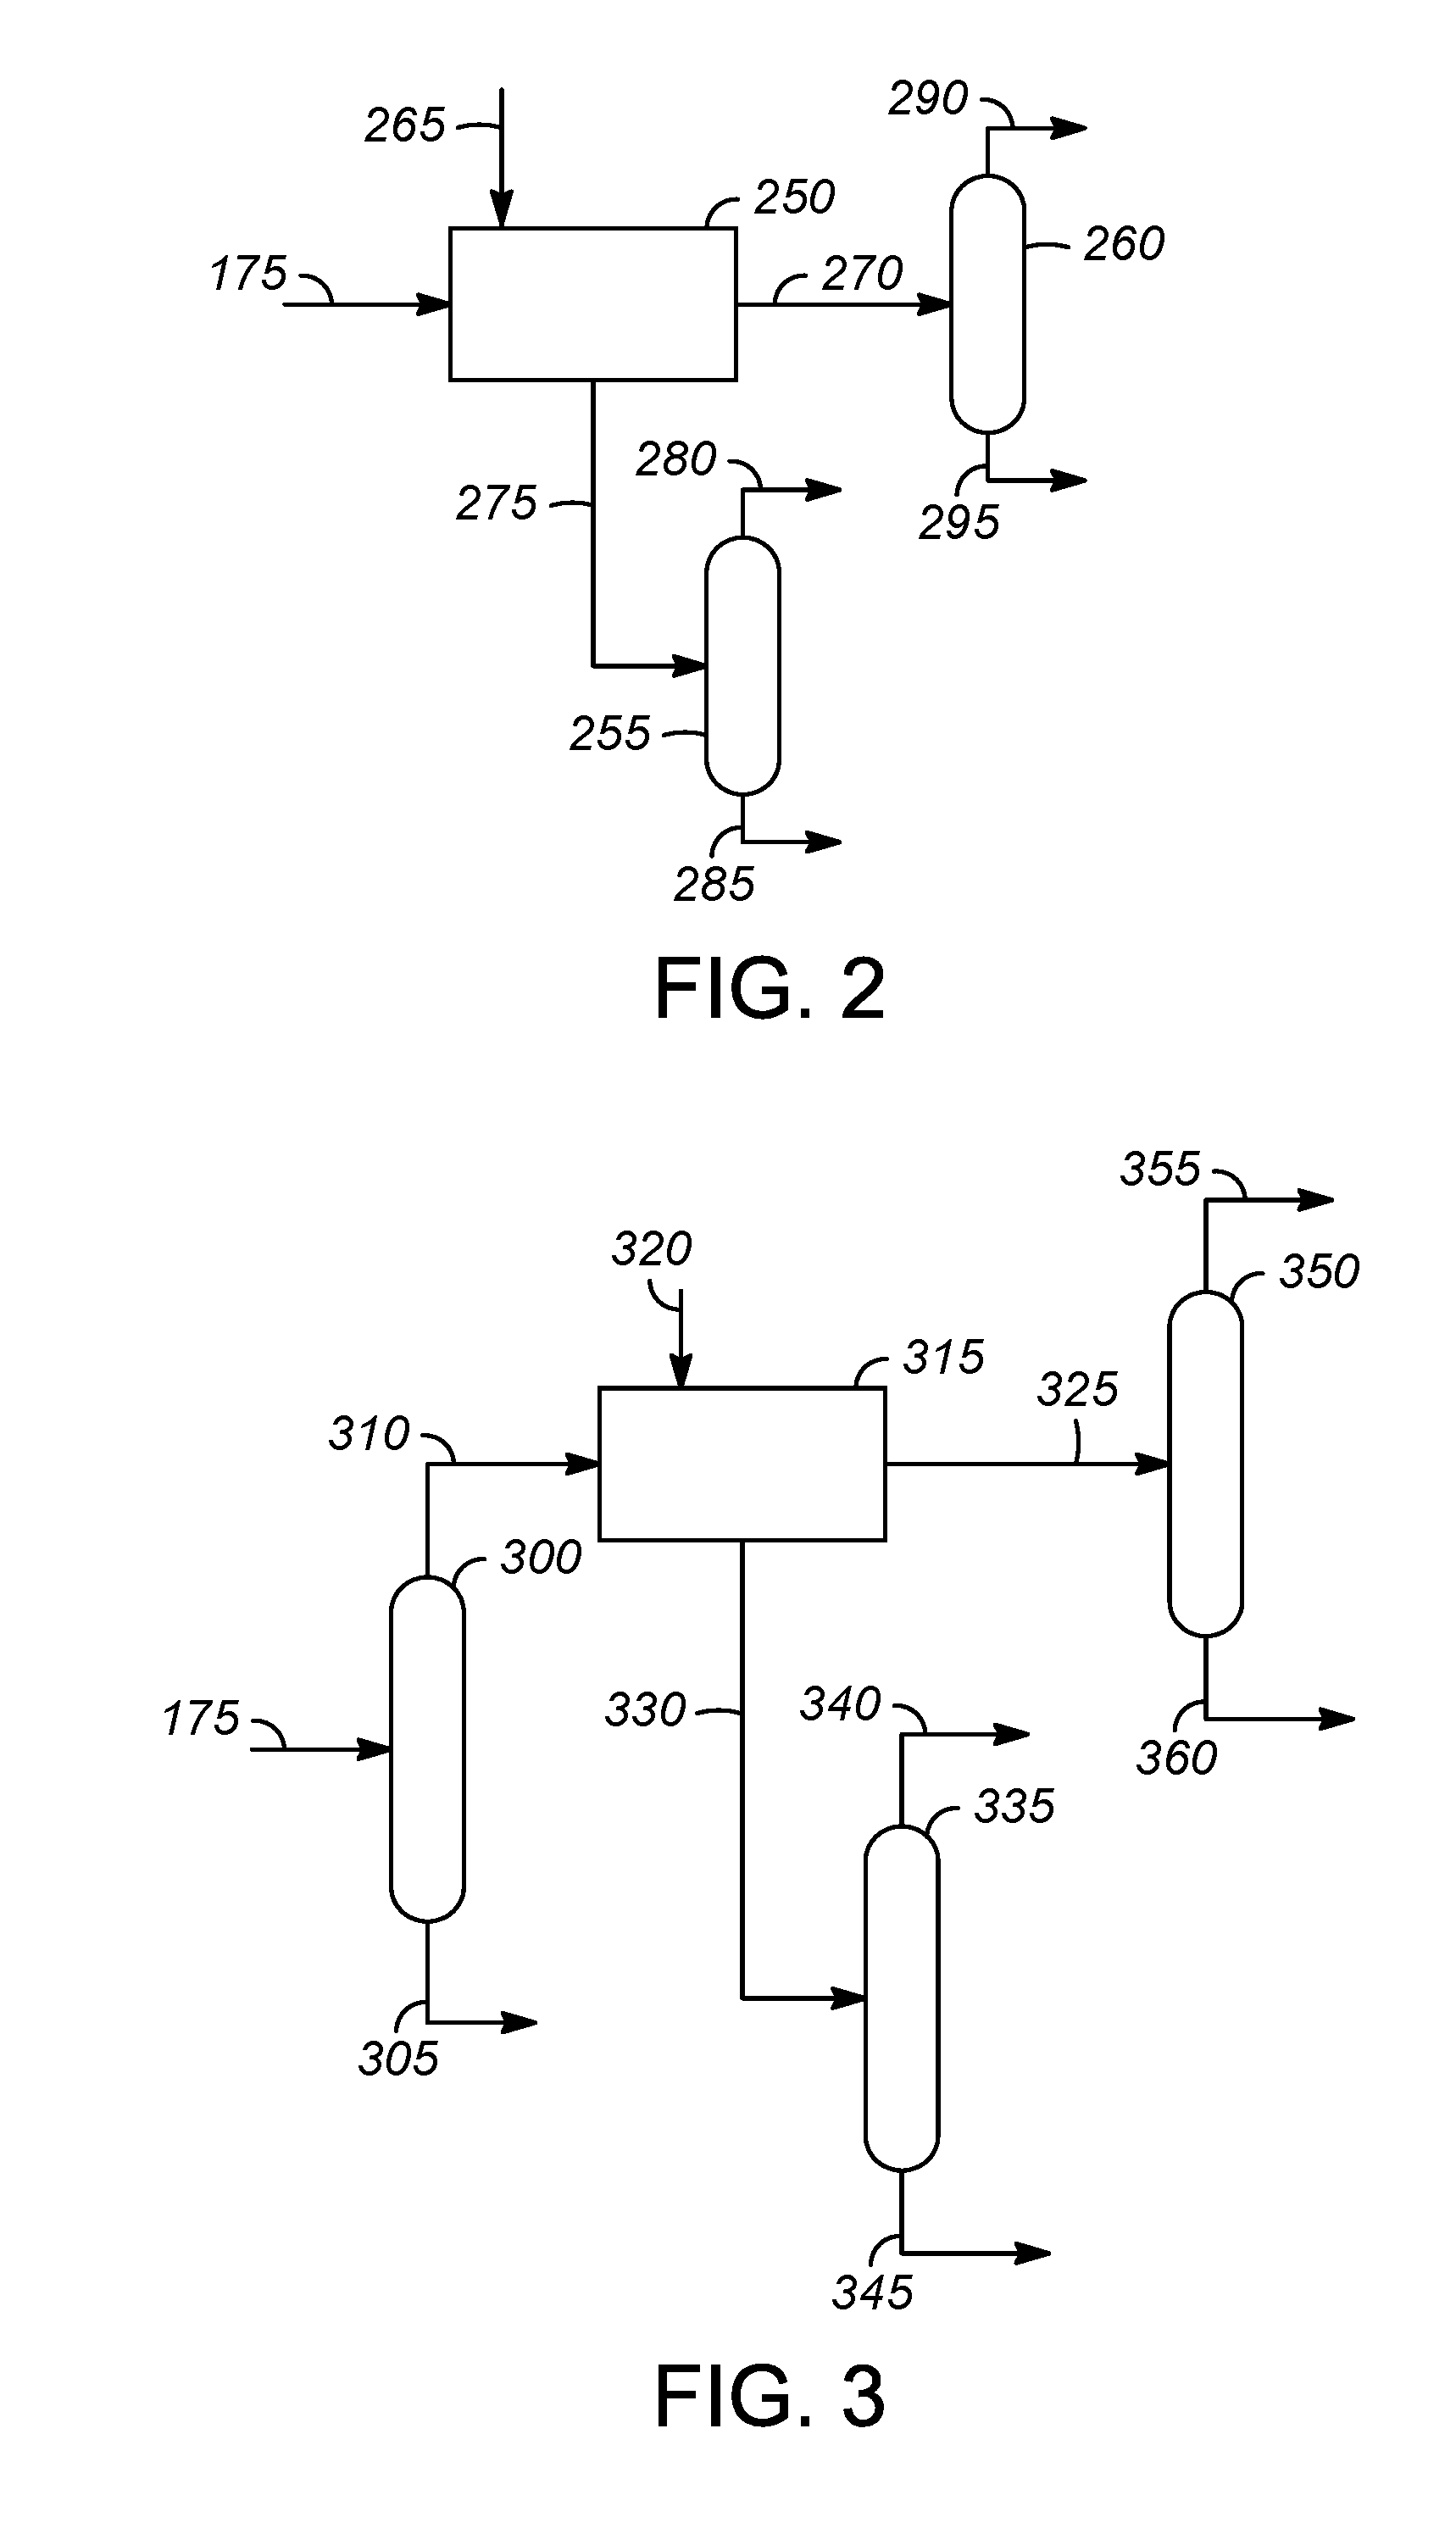 Processes for producing polymer grade light olefins from mixed alcohols